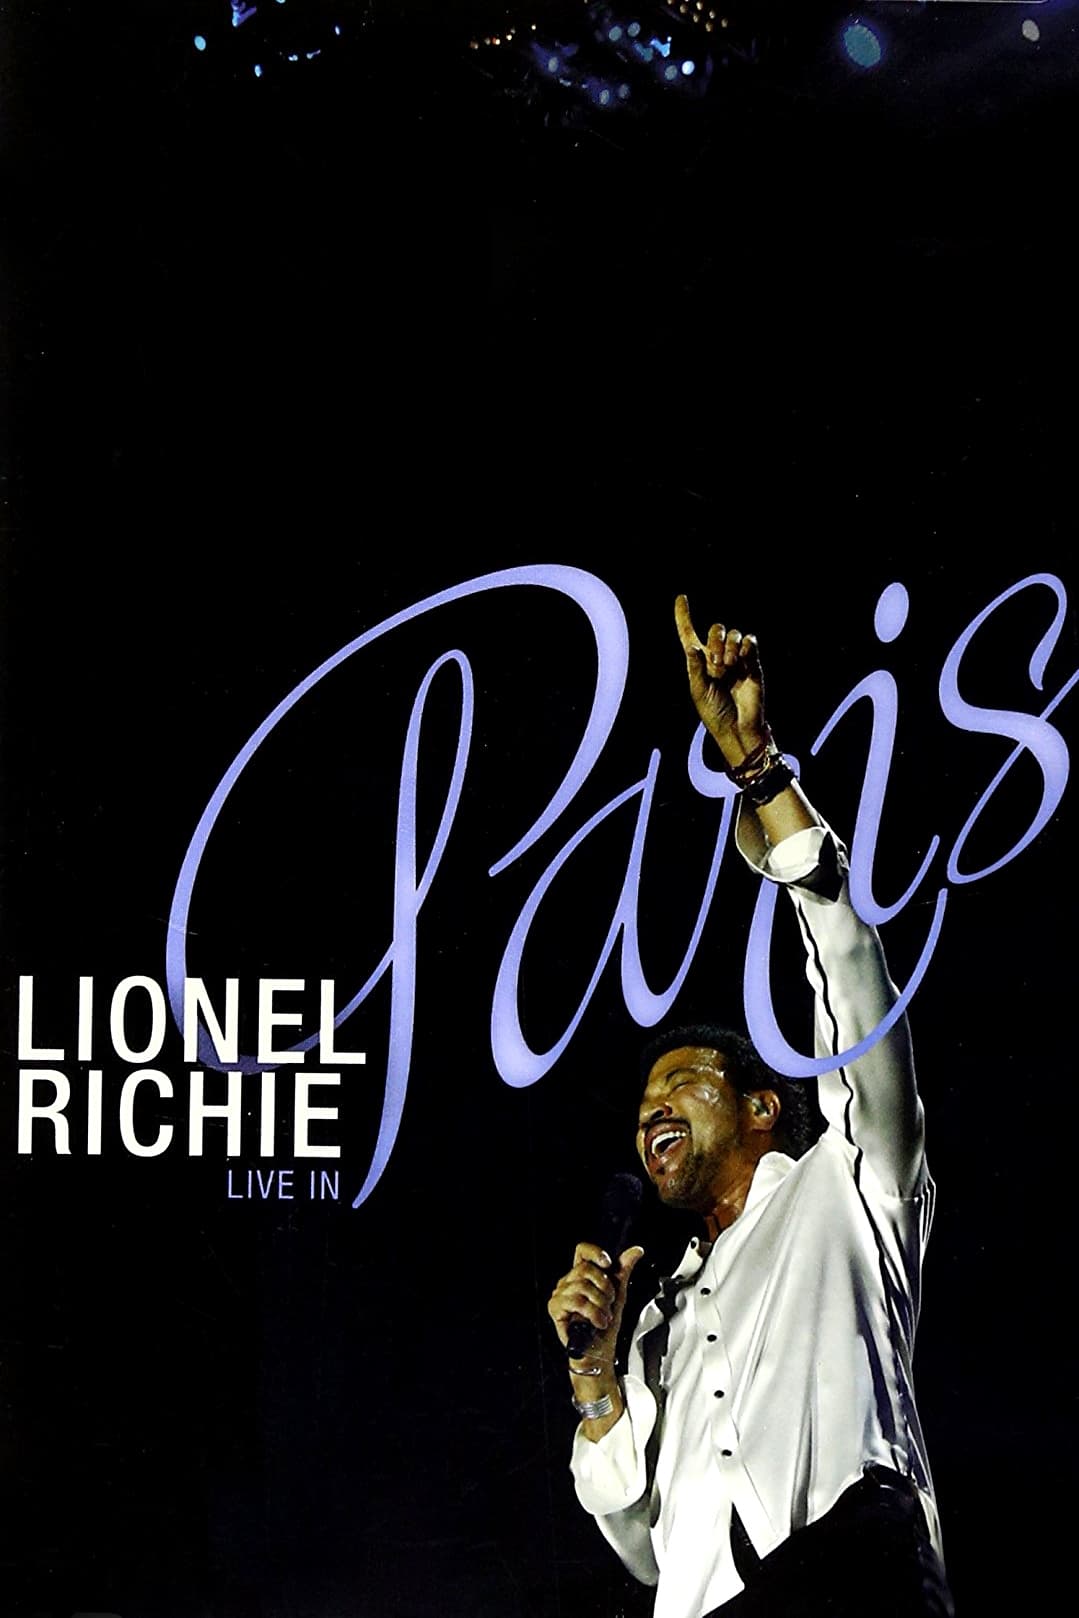 Lionel Richie: Live in Paris - His Greatest Hits and More